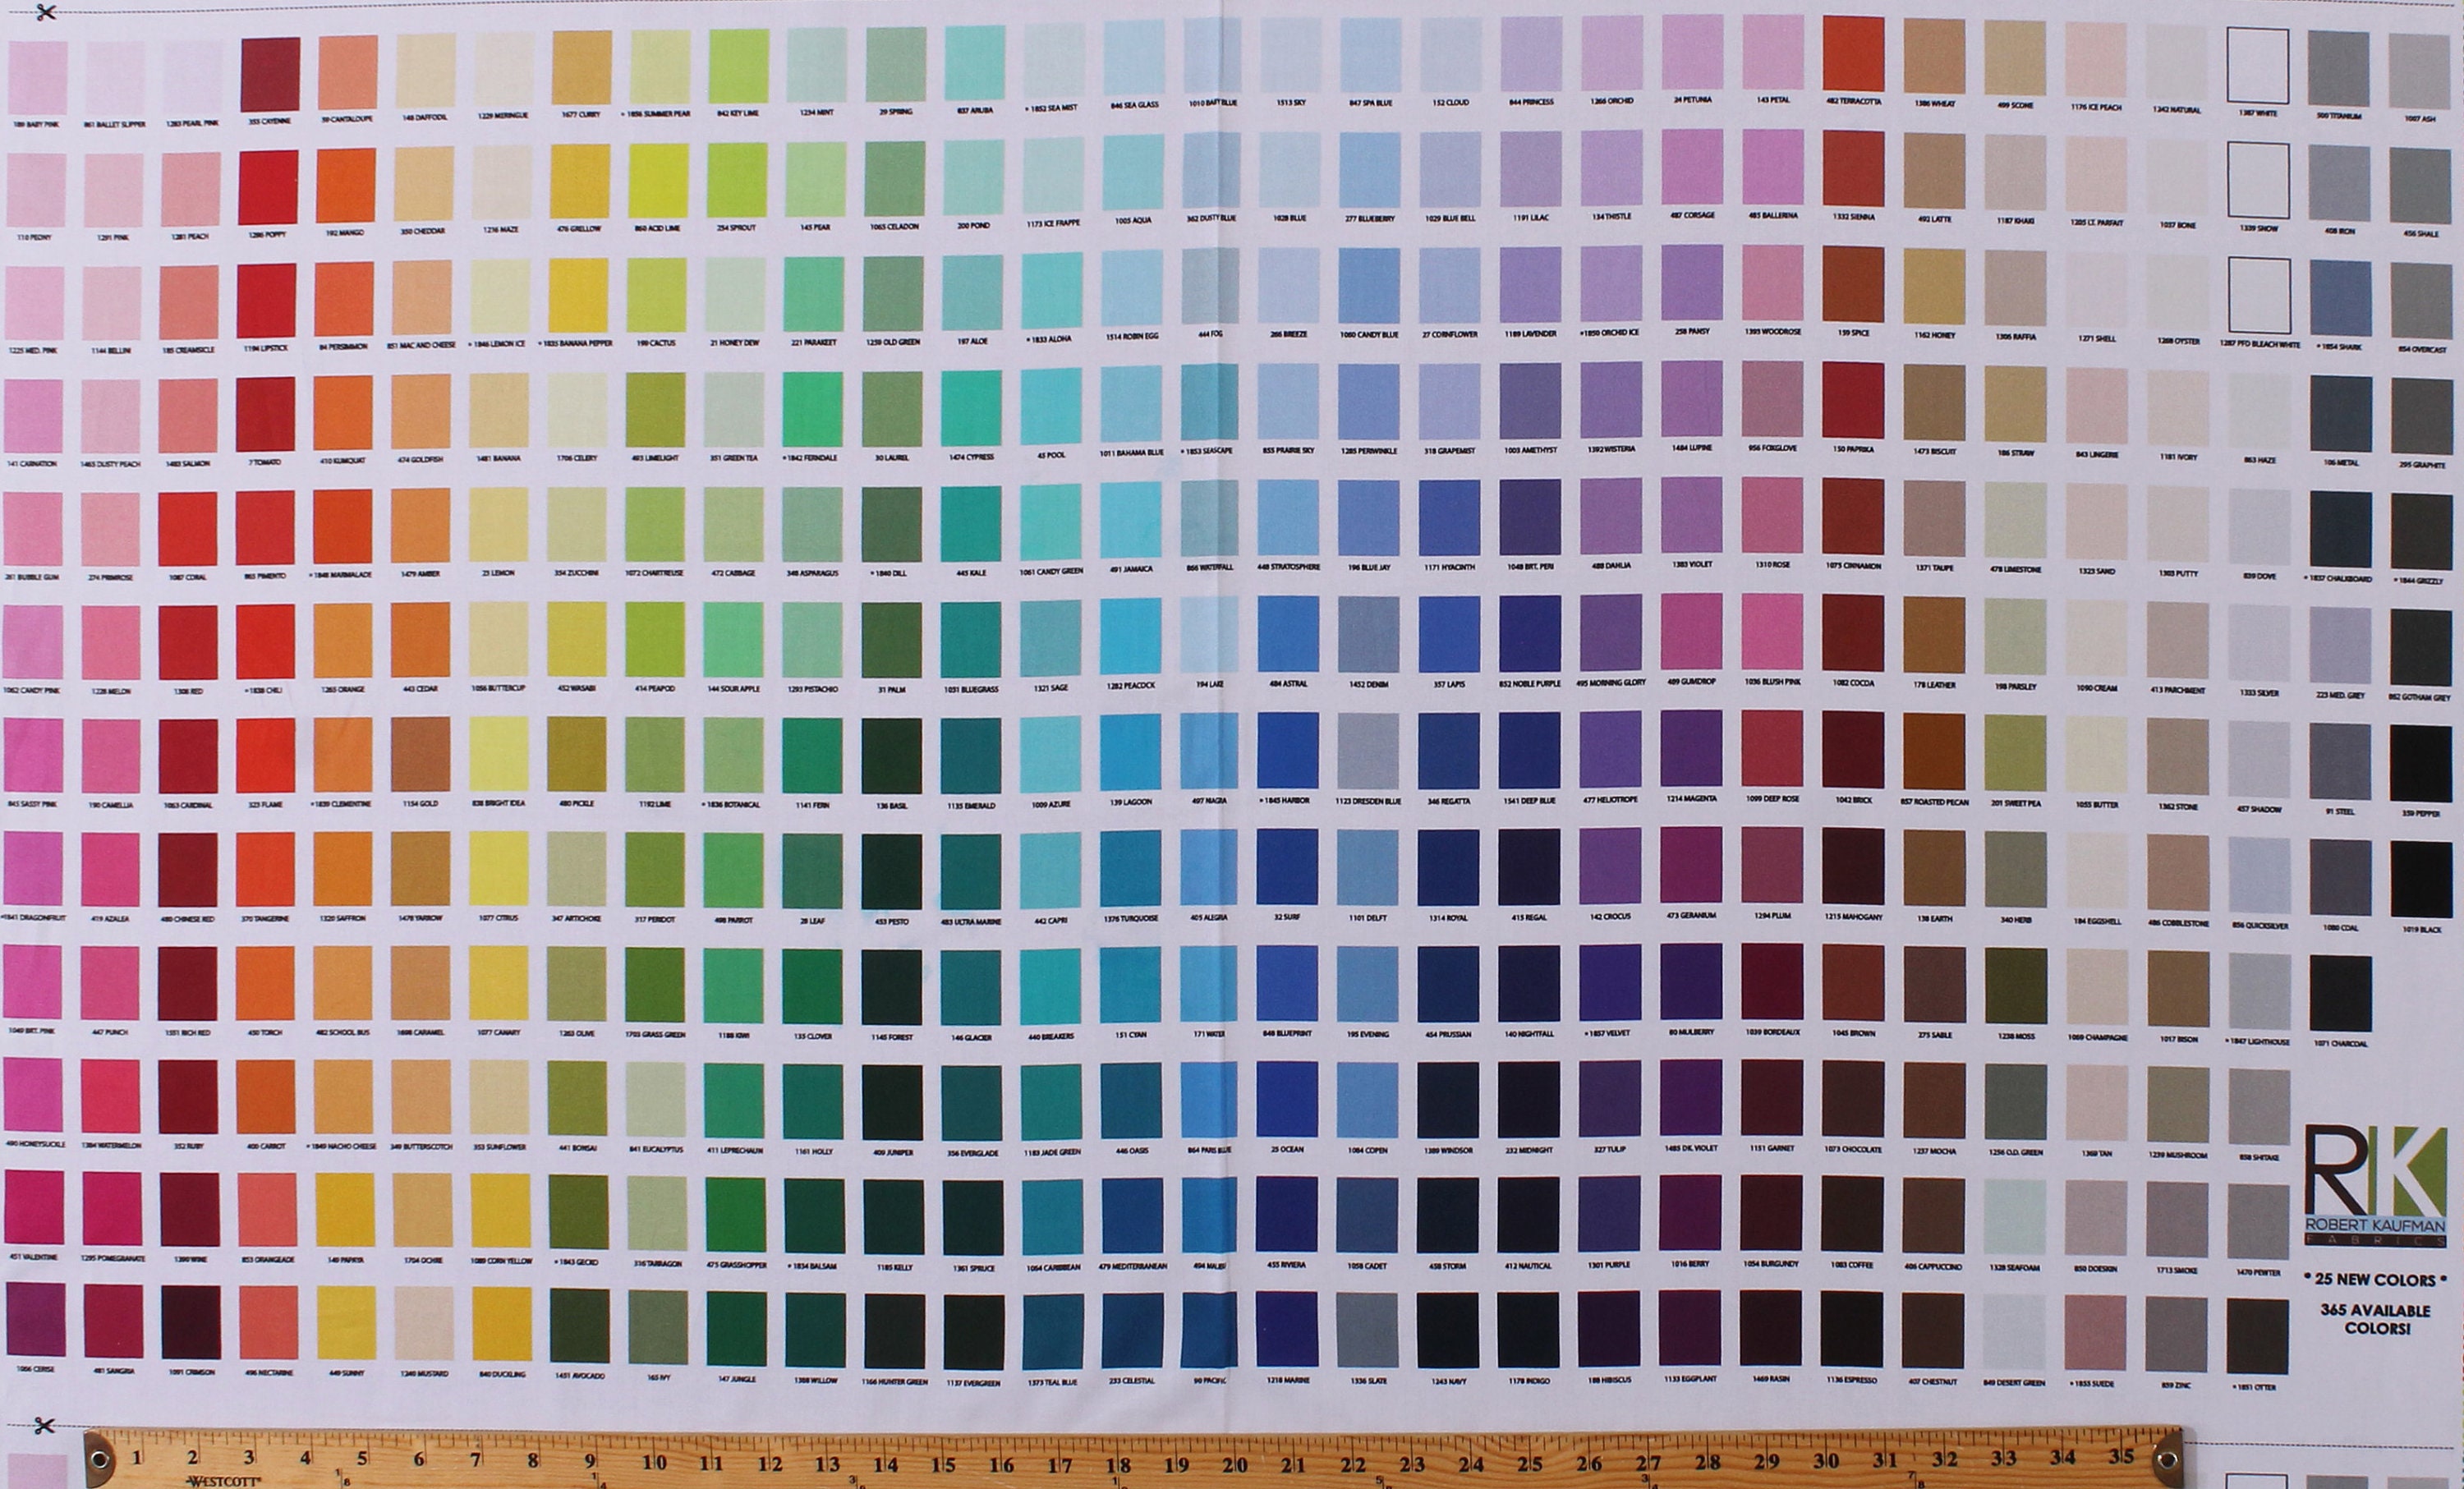 Color Chart Printed on Fabric